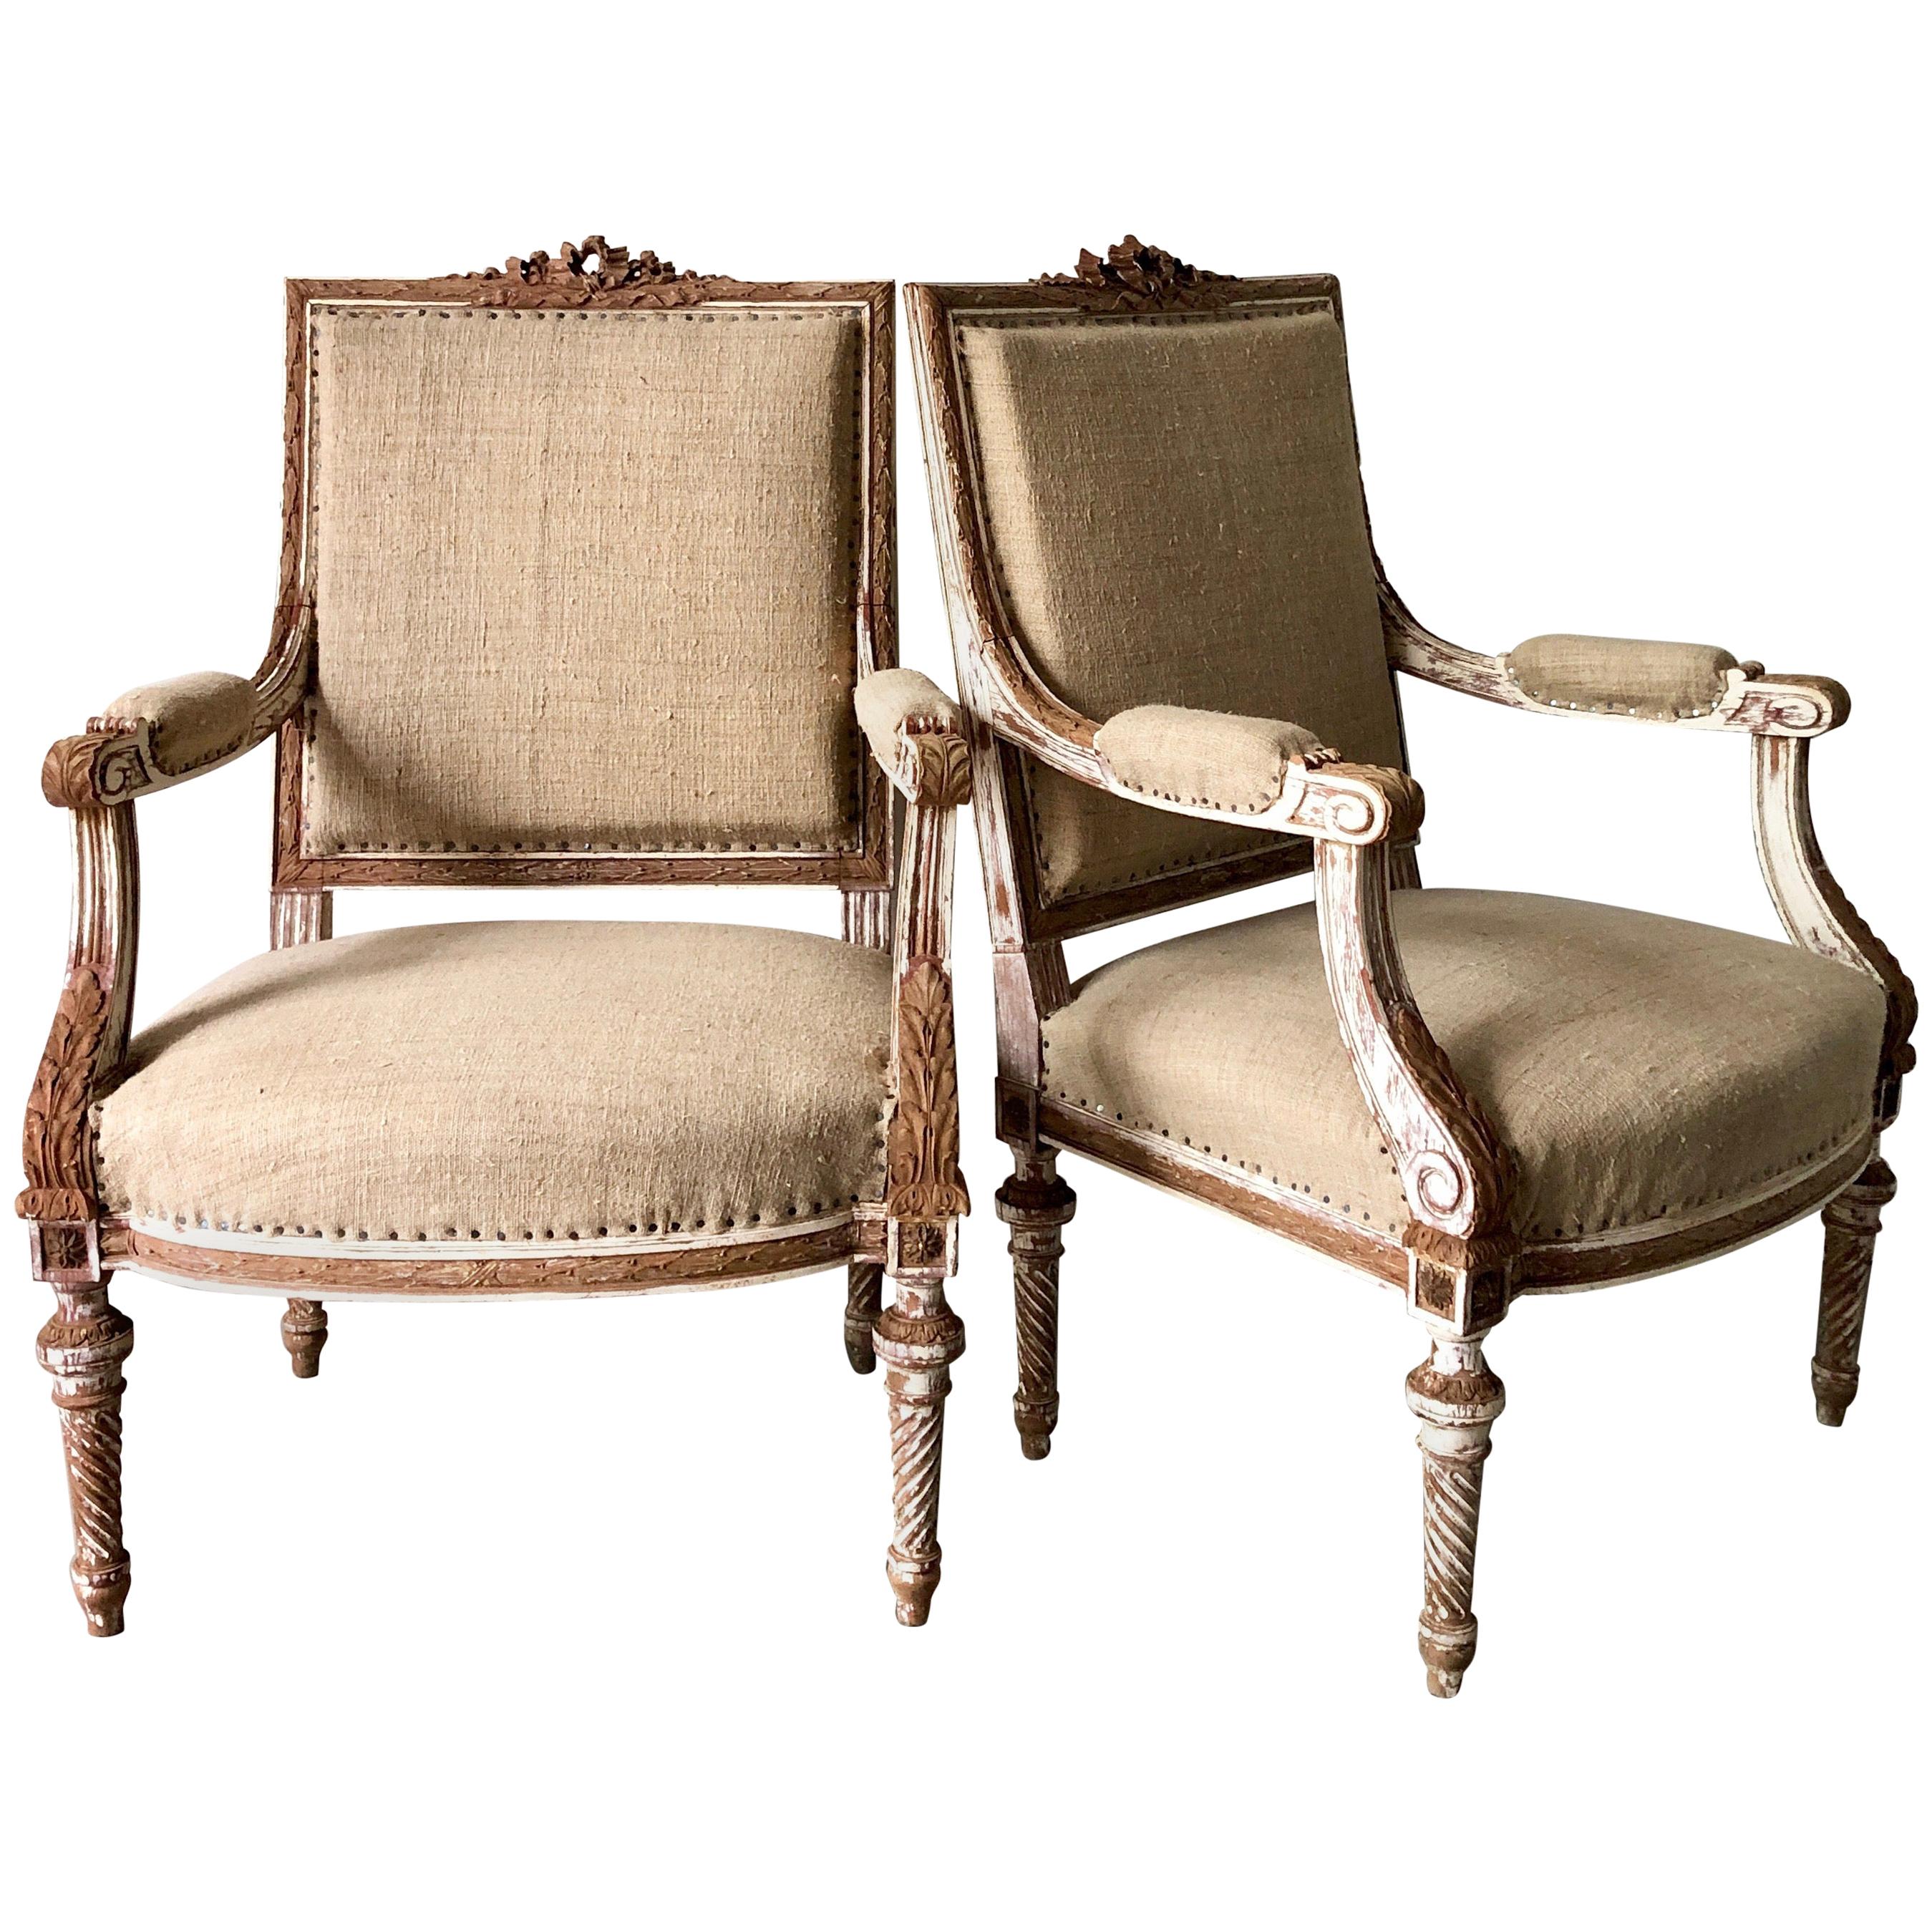 A pair of 19th century French armchairs à la reine with flat back and richly carved solid wood frame with ribbons, acanthus and rosettes on conical twisted fluted legs, showing some places fragments of original giltwood.
Upholstered in raw